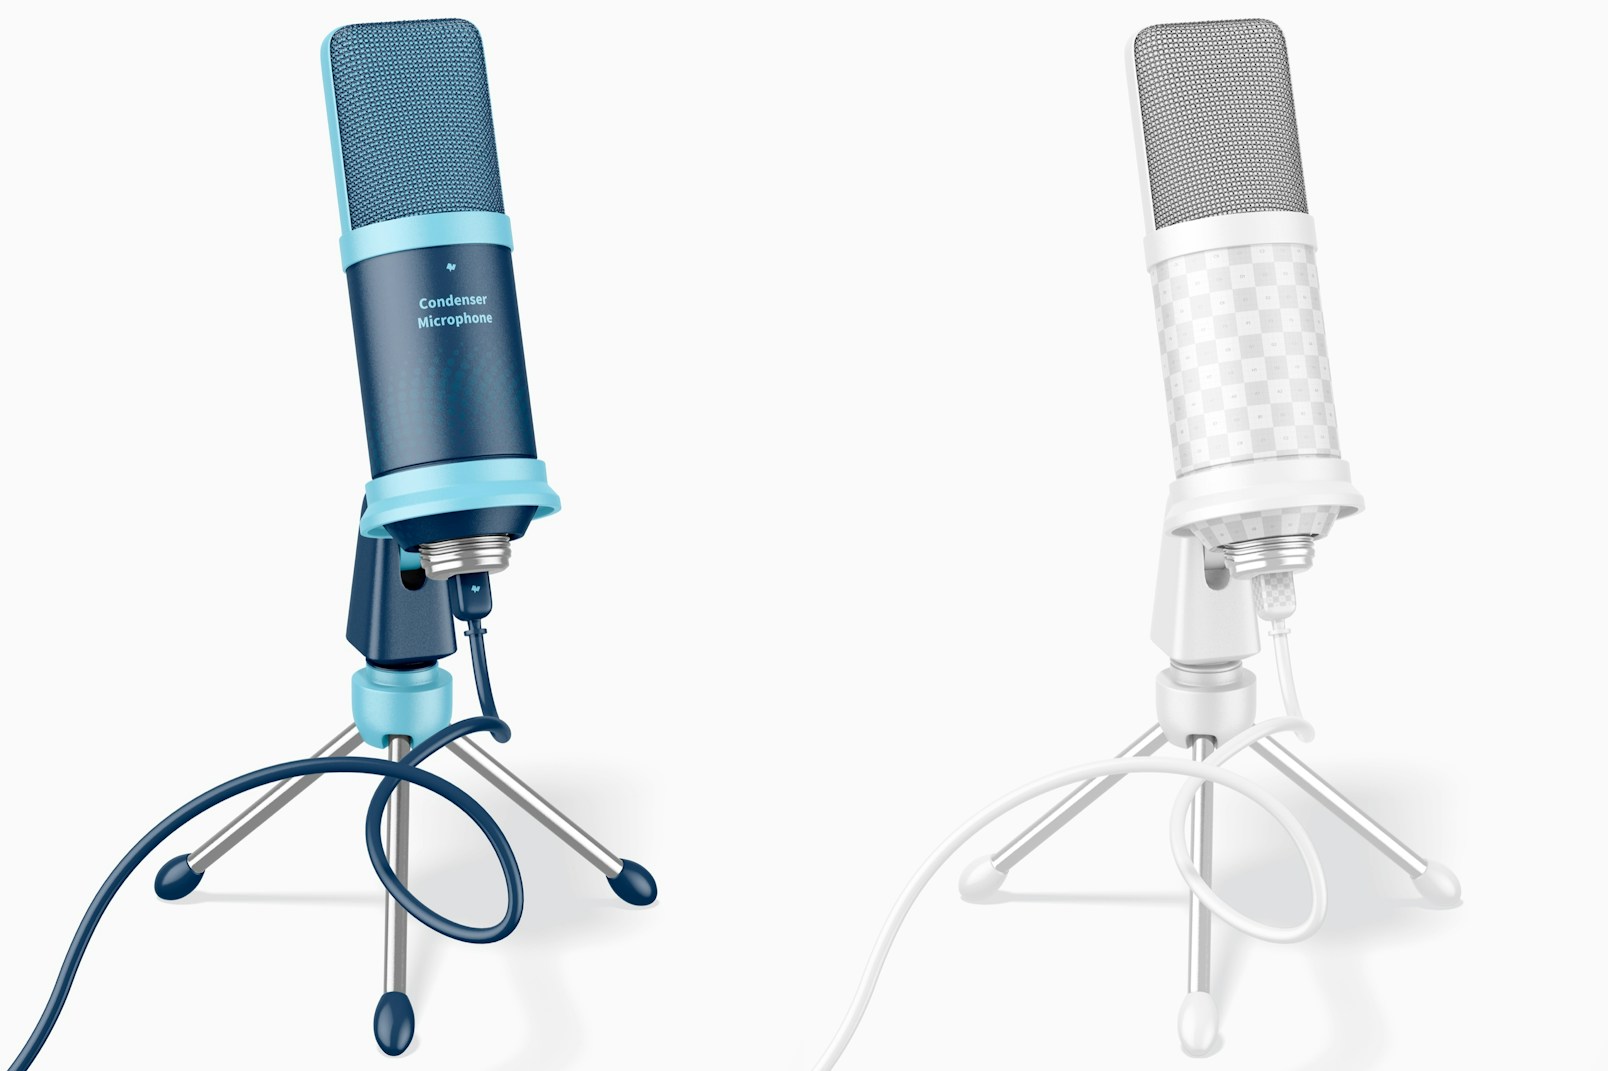 Condenser Microphone Mockup, Front View